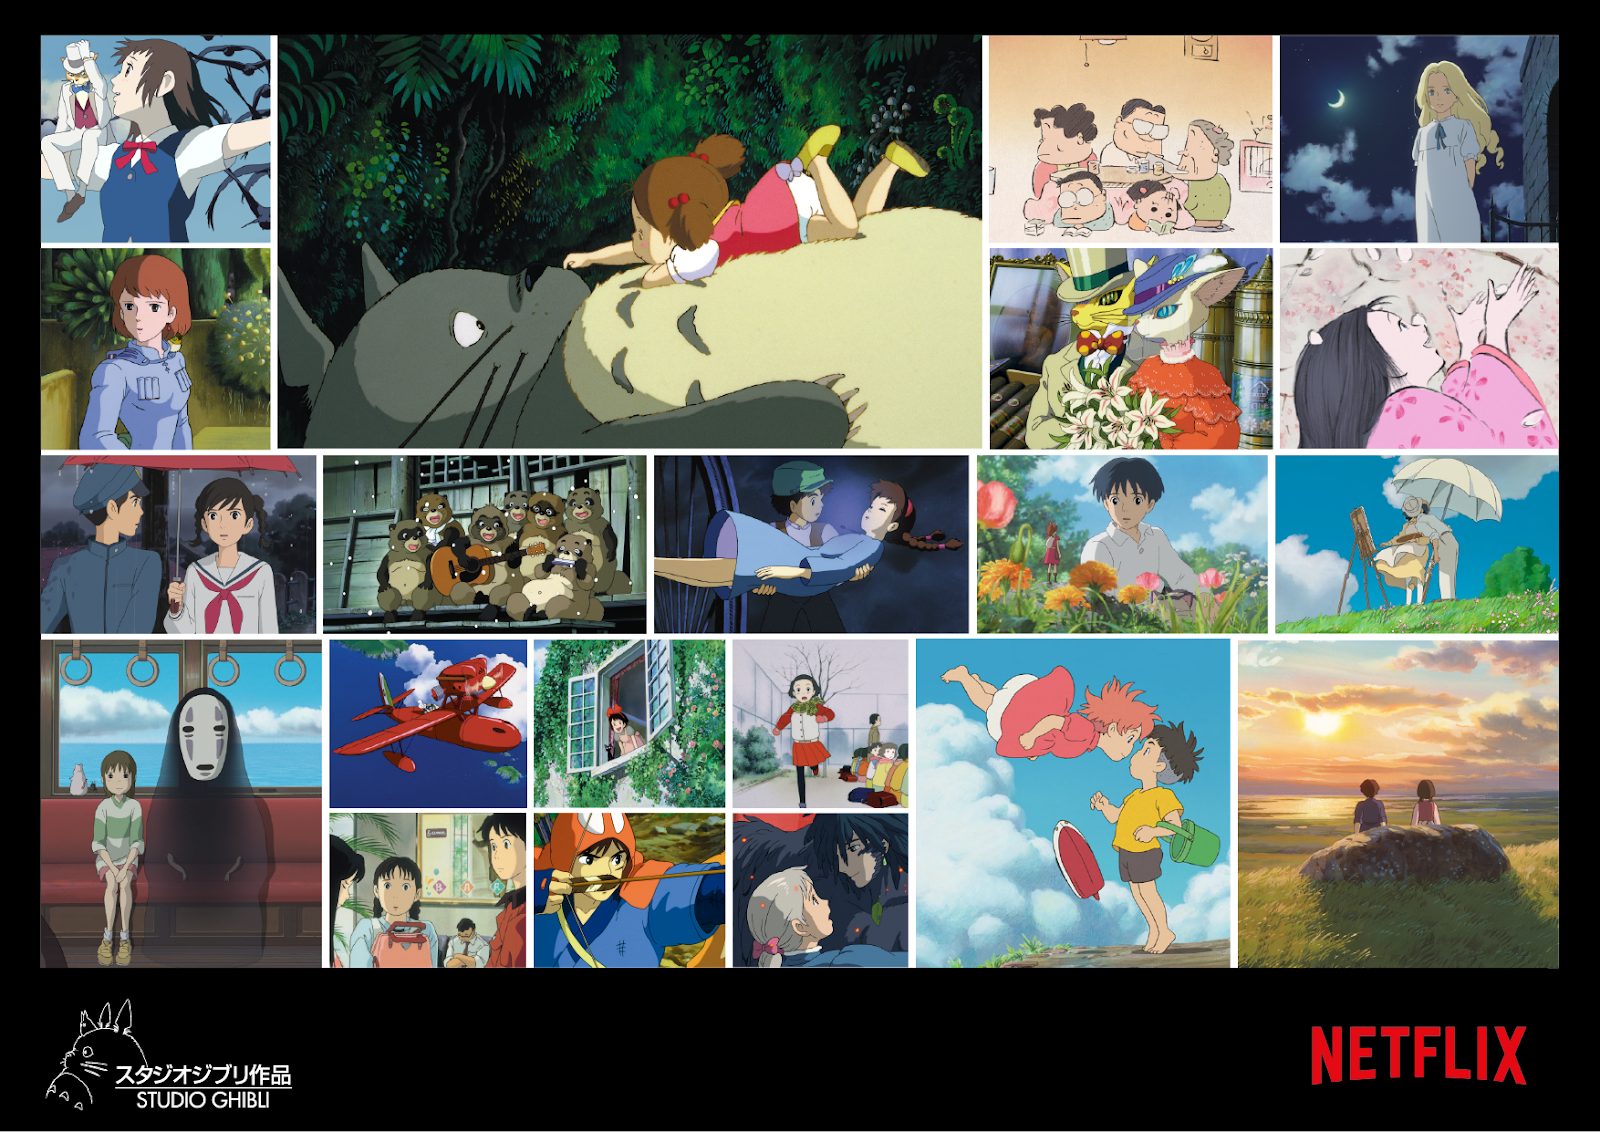 Studio Ghibli releases its complete collection of soundtracks on